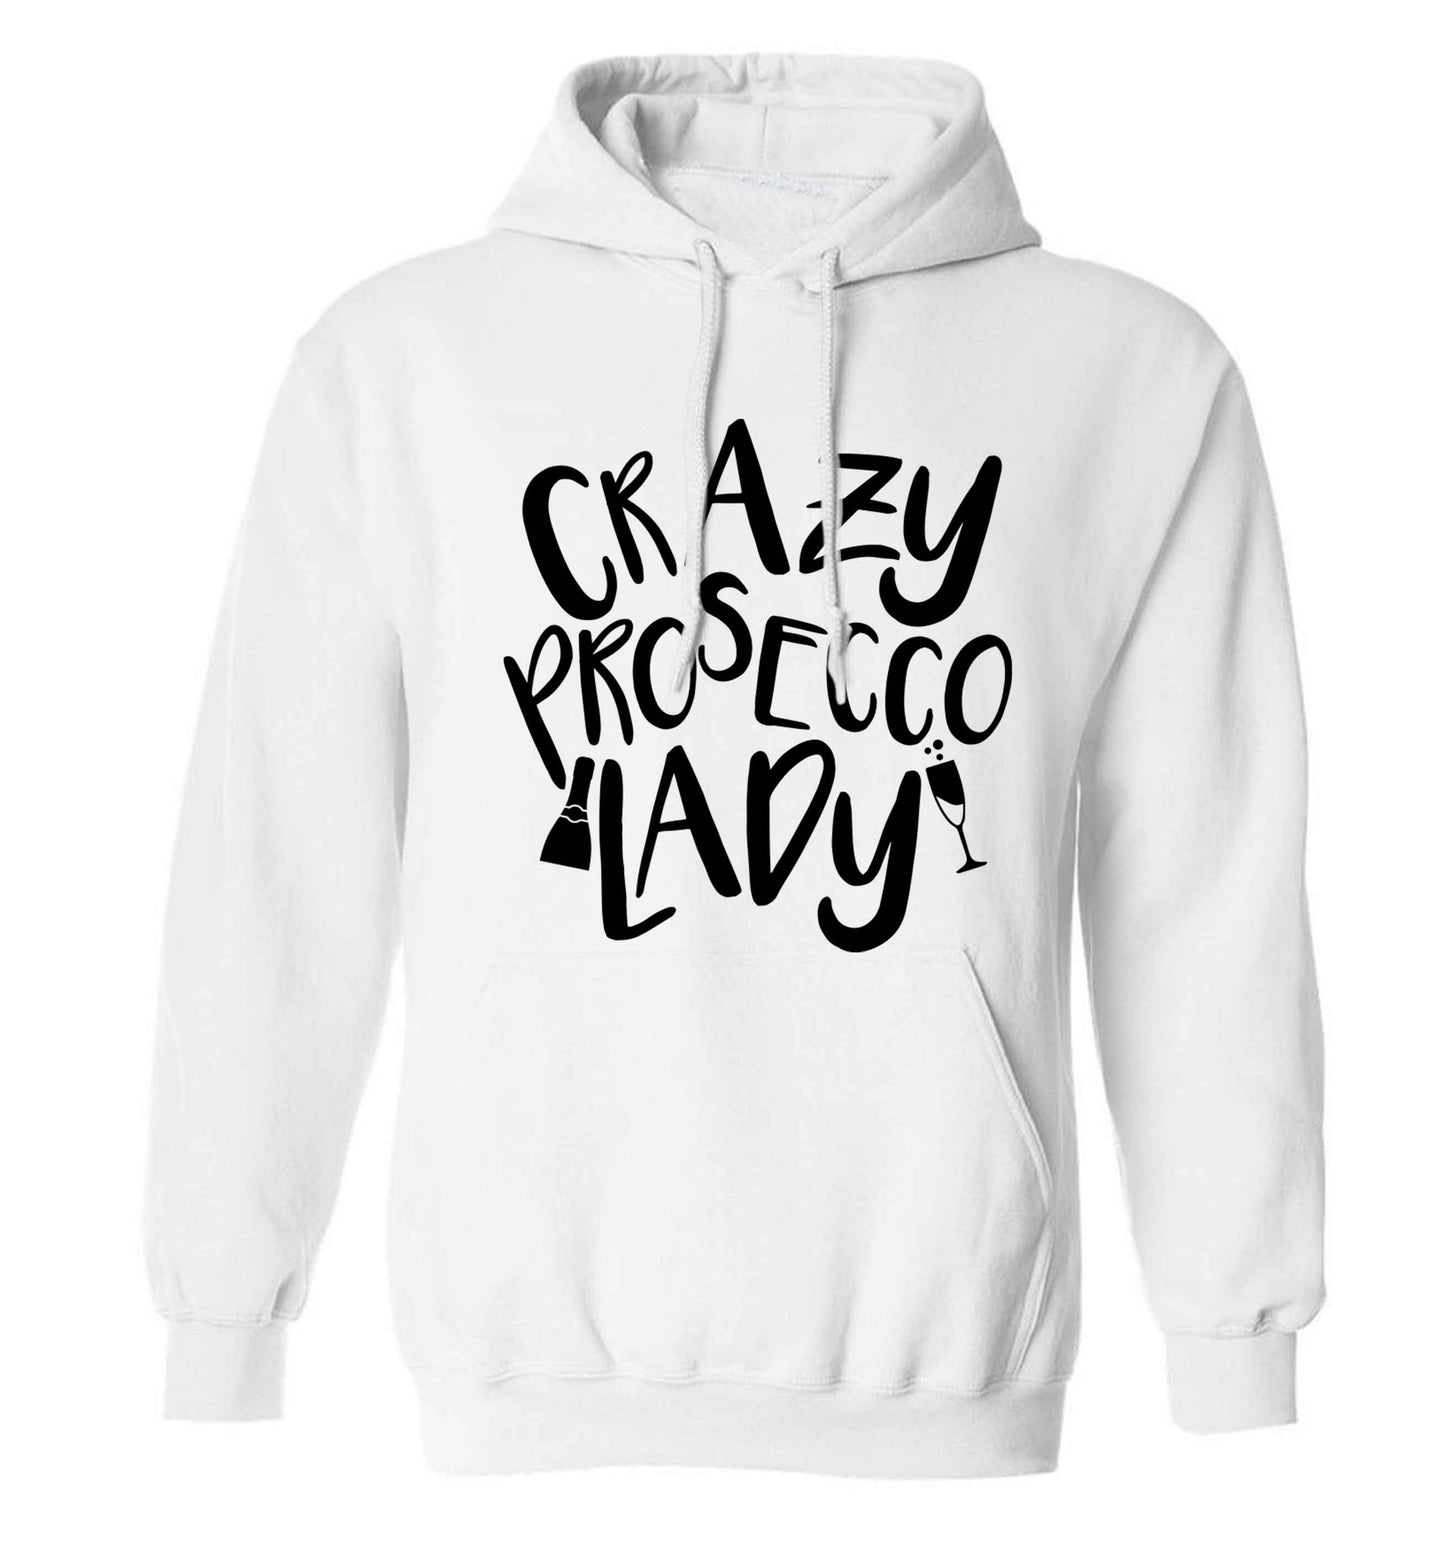 Crazy prosecco lady adults unisex white hoodie 2XL